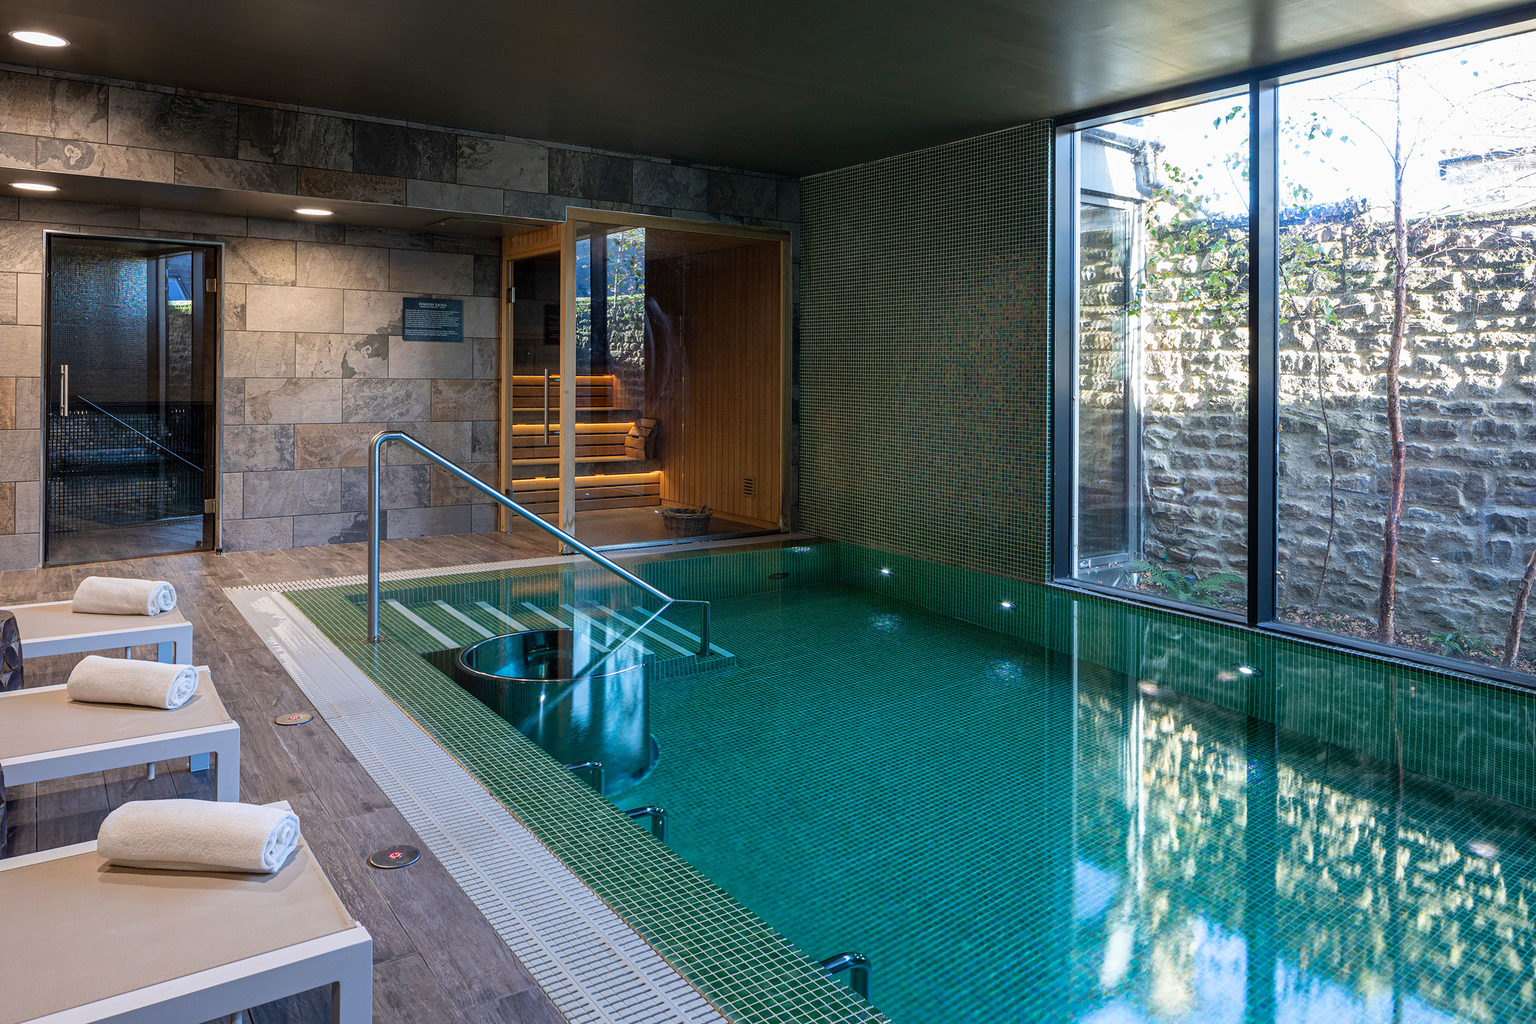 The hydrotherapy pool available to spa day guests in the Swinton Country Club in North Yorkshire